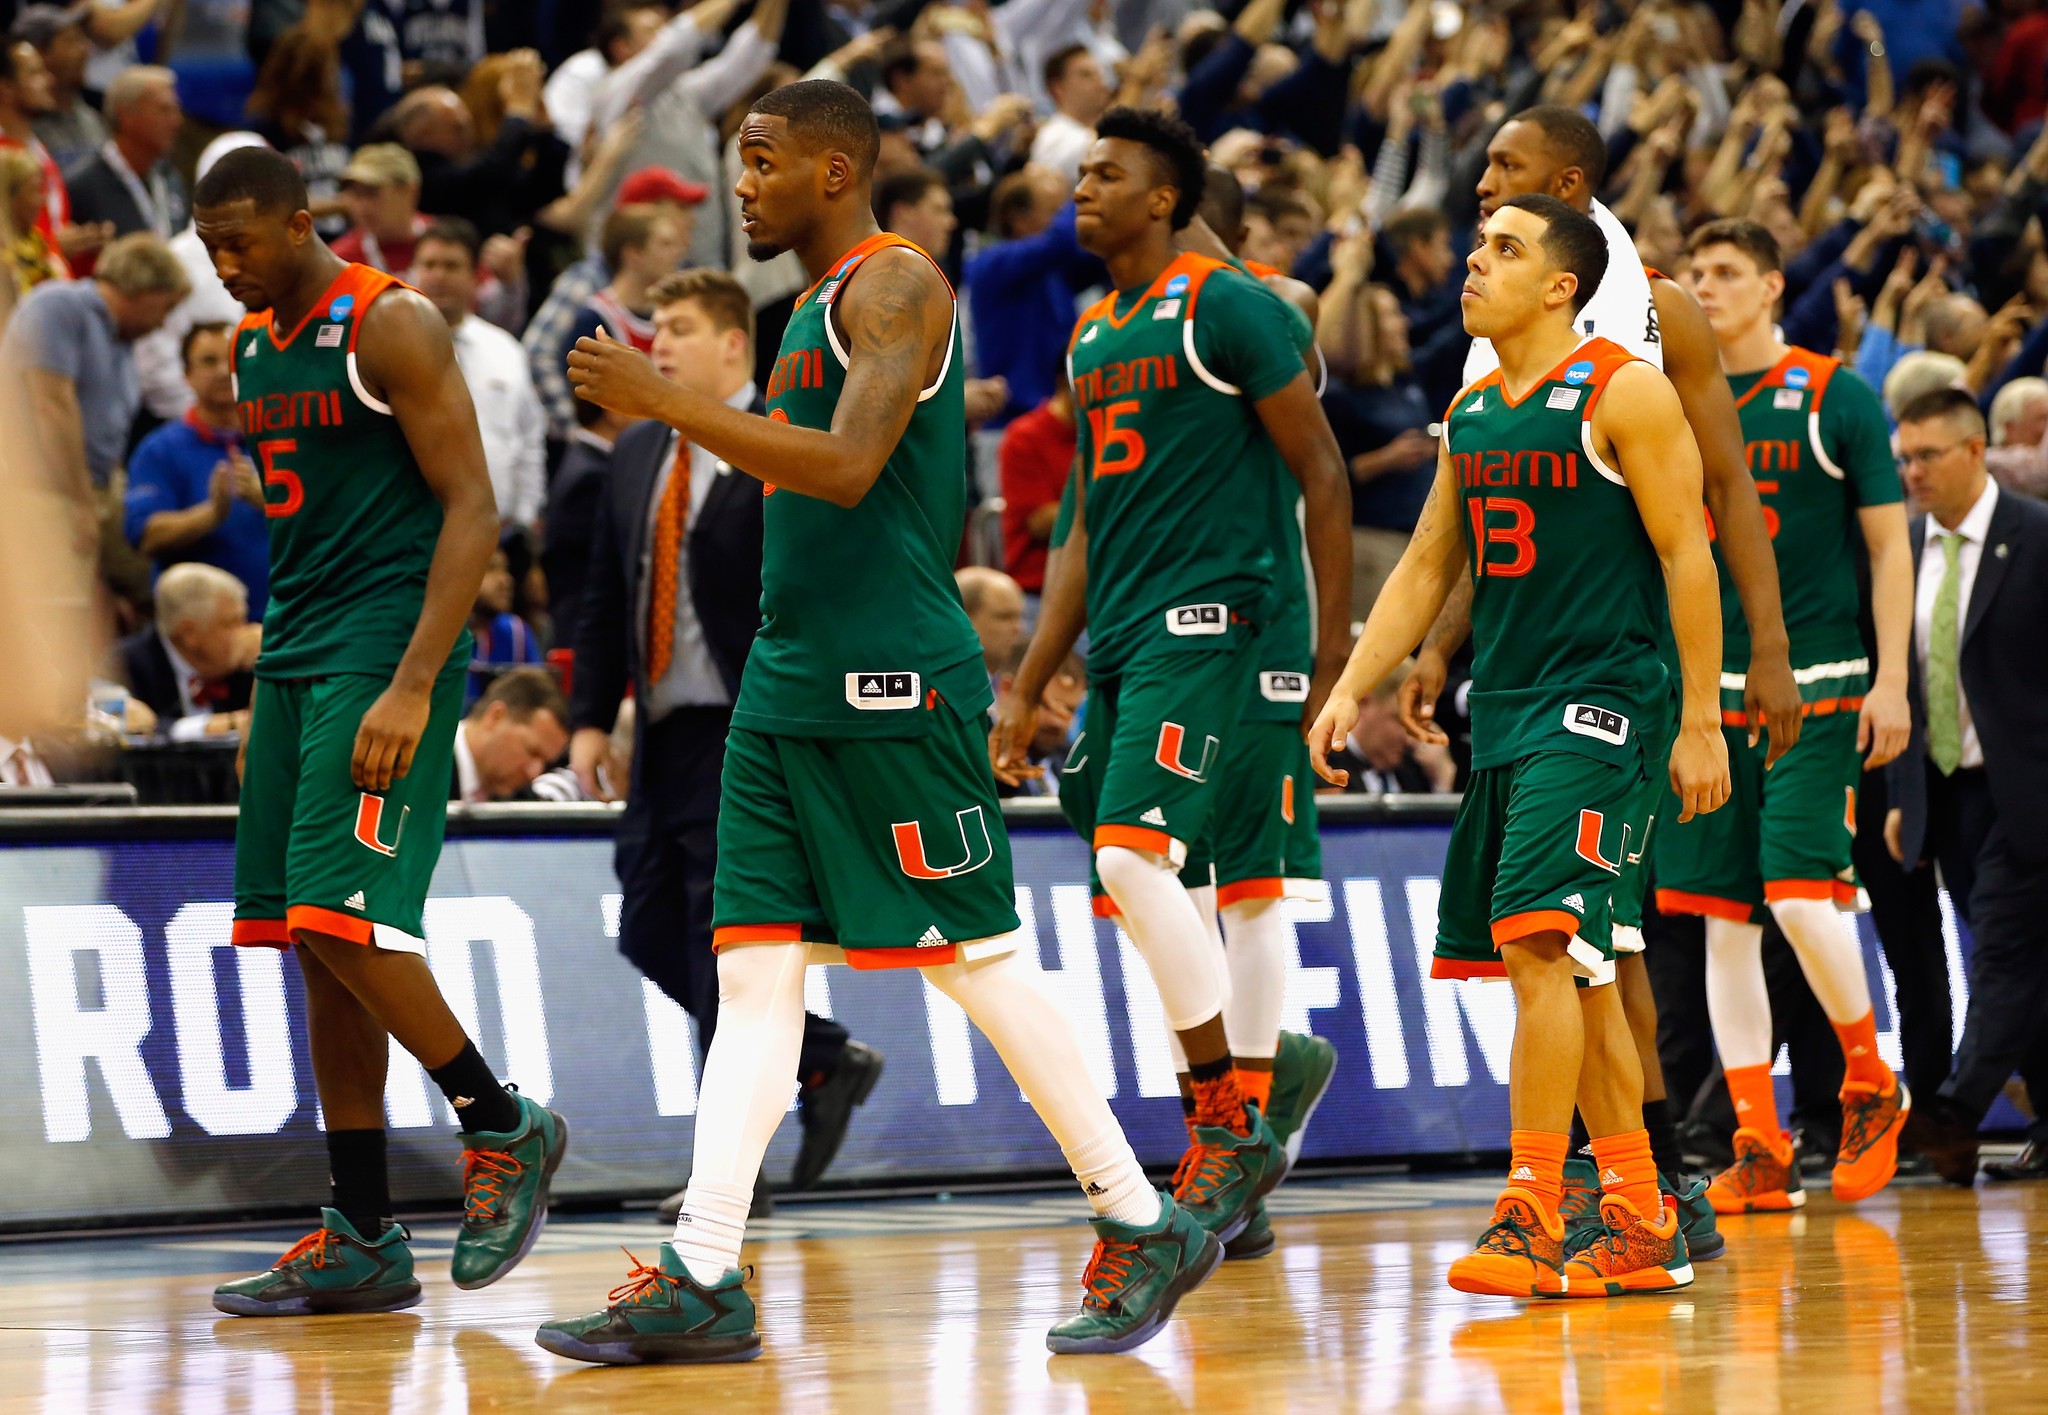 Departing leaders see bright future for Hurricanes basketball